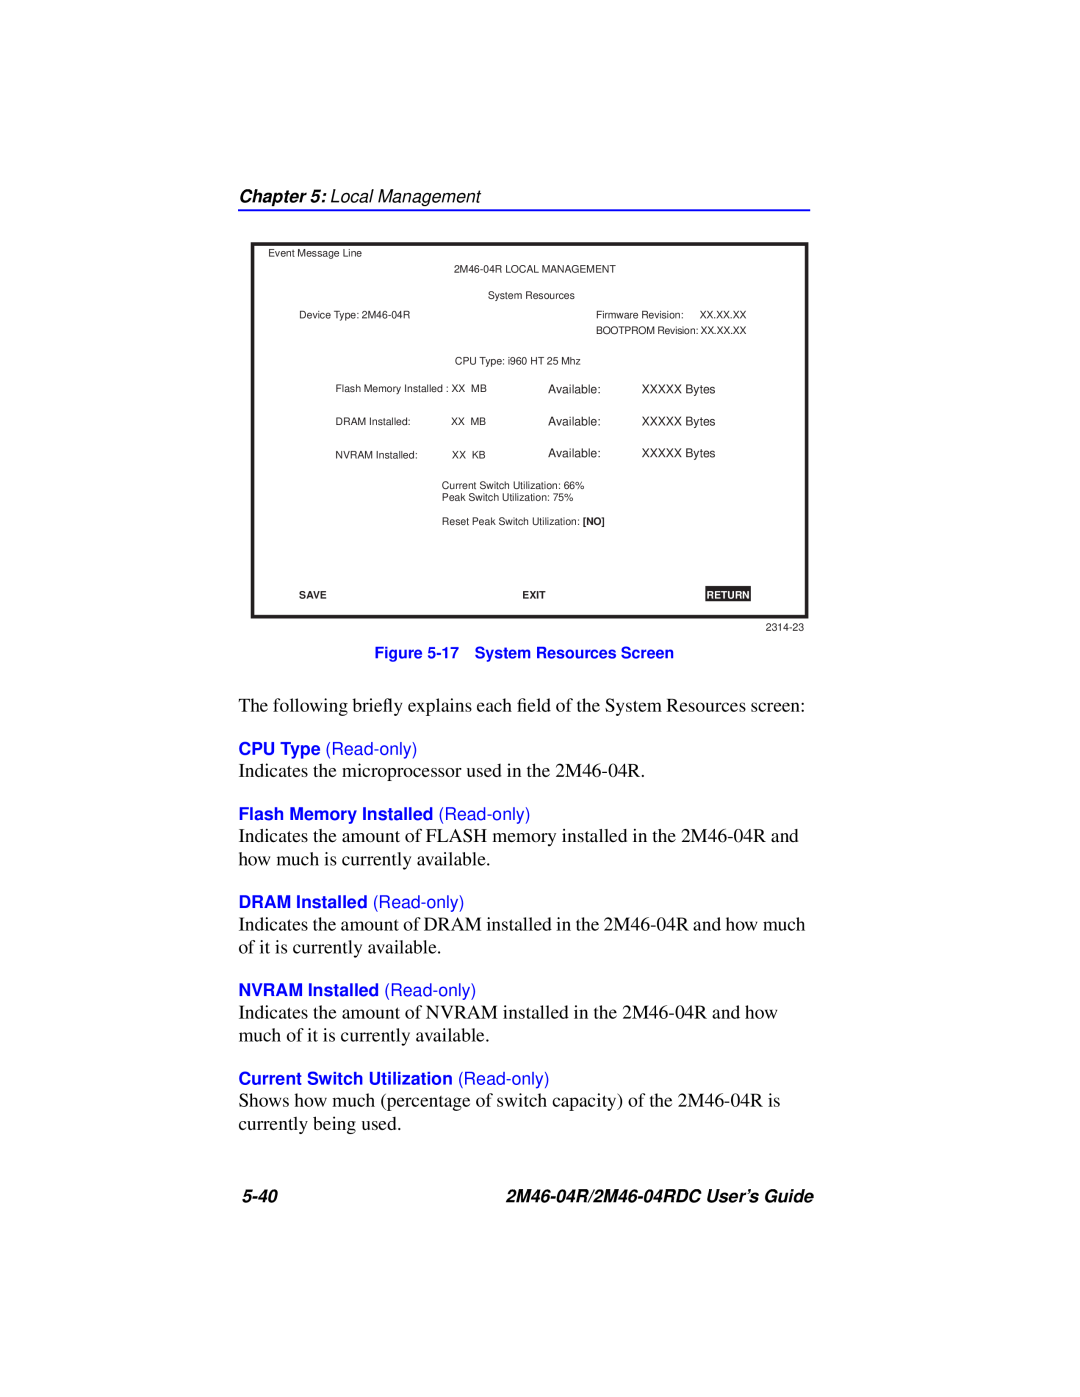 Cabletron Systems pmn manual The following brieﬂy explains each ﬁeld of the System Resources screen 